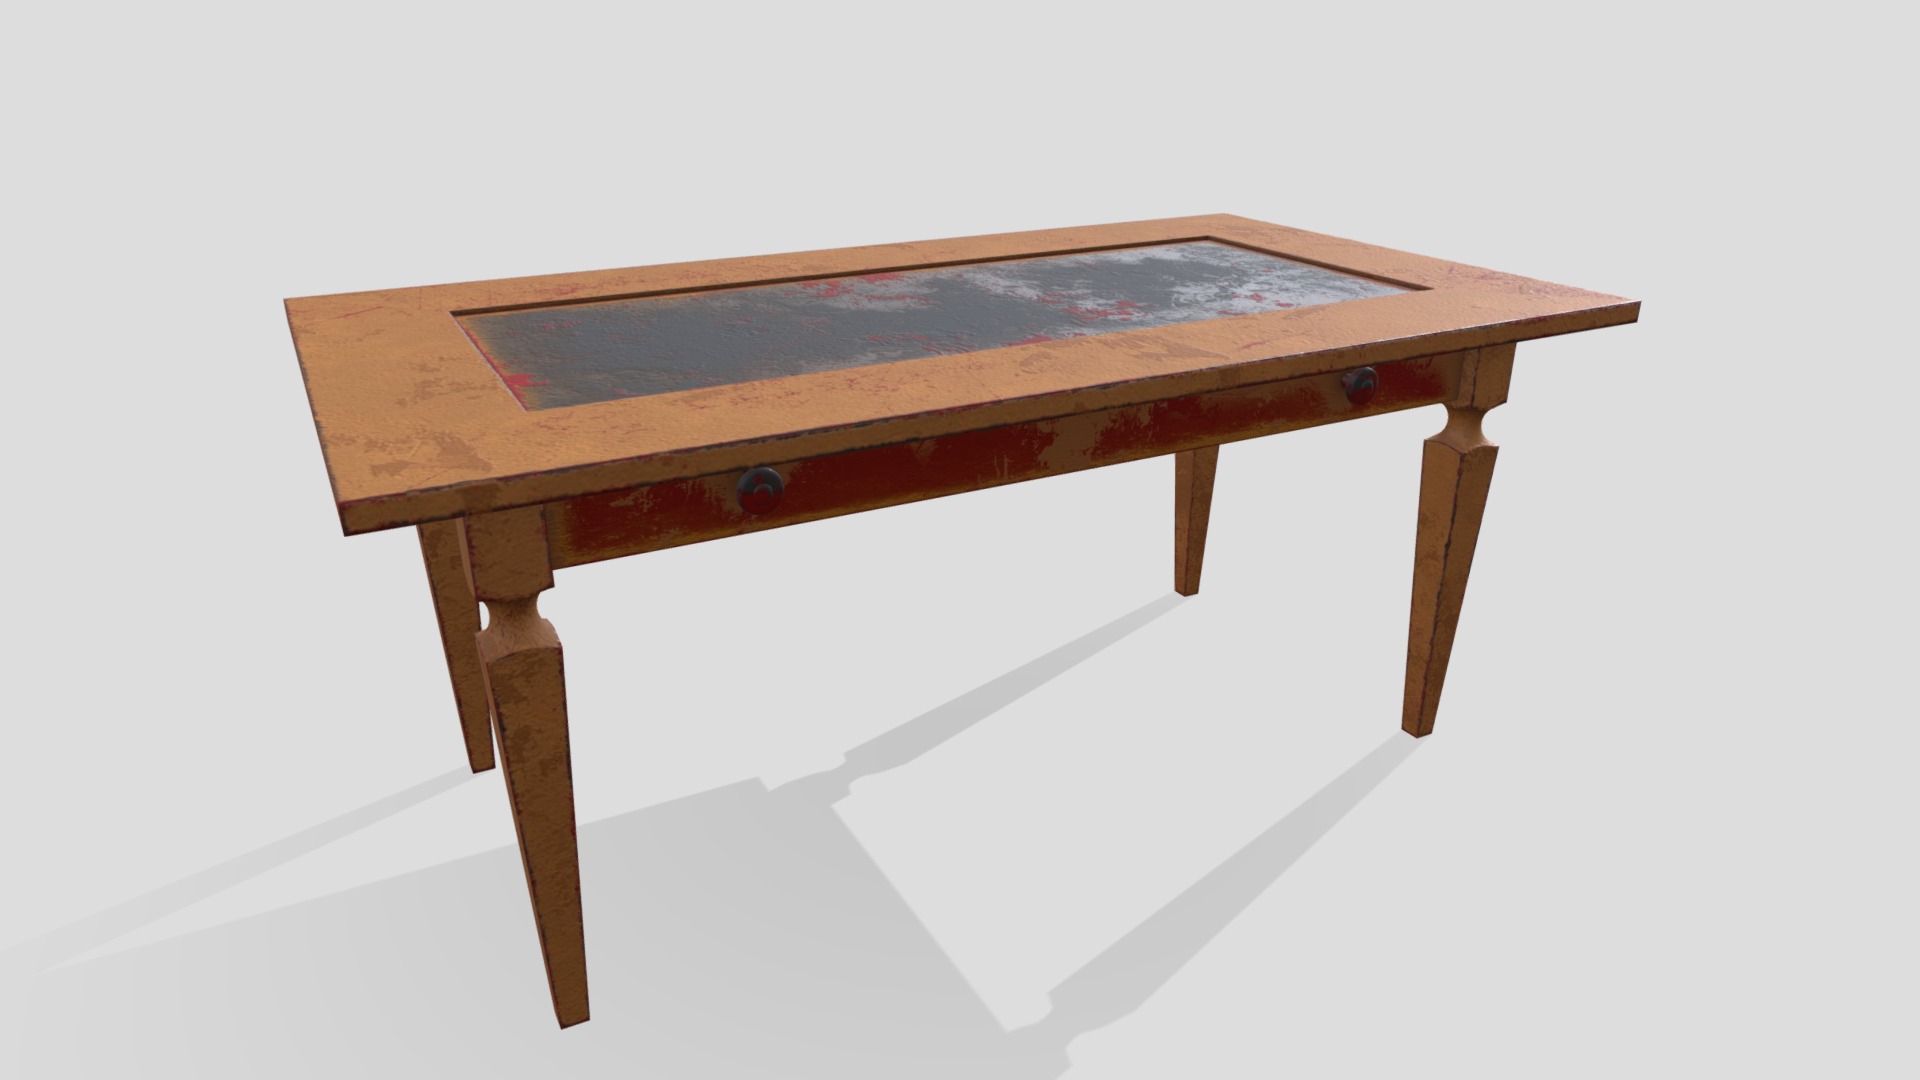 3D model Garage Table - This is a 3D model of the Garage Table. The 3D model is about a wooden table with a metal frame.